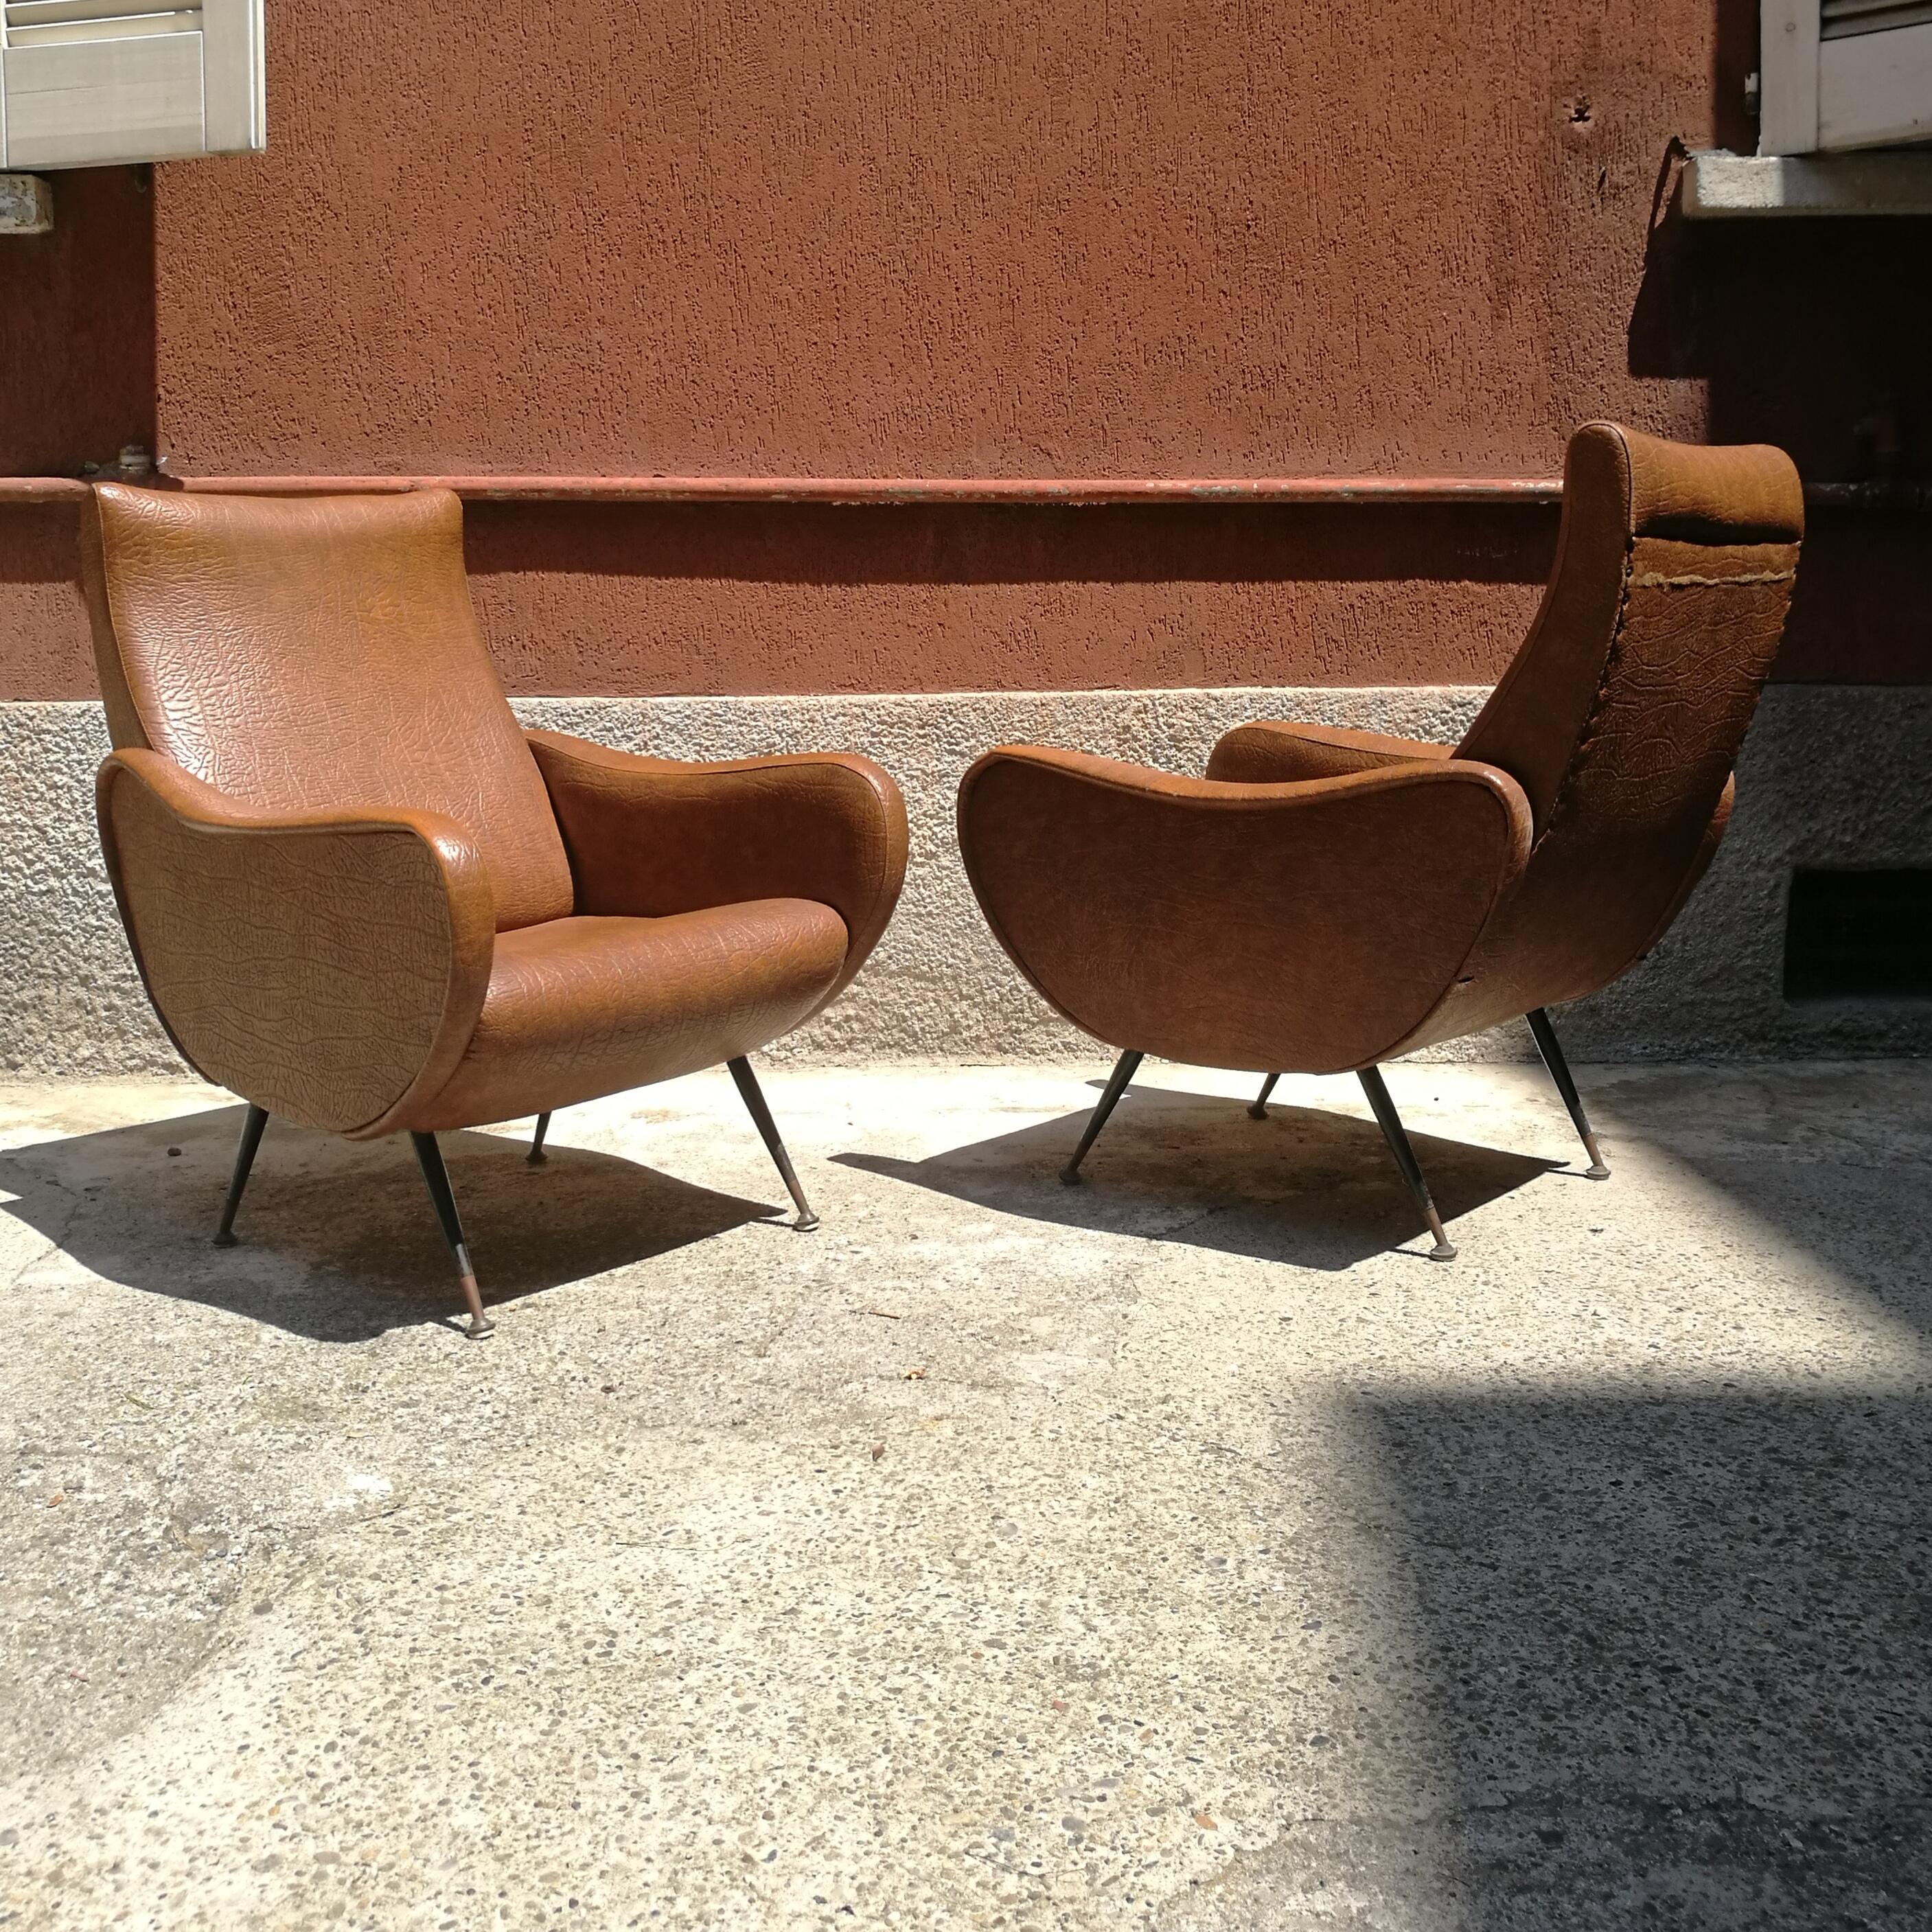 Italian leatherette armchairs from 1950s, in the style of Lady armchair by Marco Zanuso
Couple of Italian brown leatherette armchairs from fifties, in the style of lady armchair by Marco Zanuso. Structured with their original filling and covered